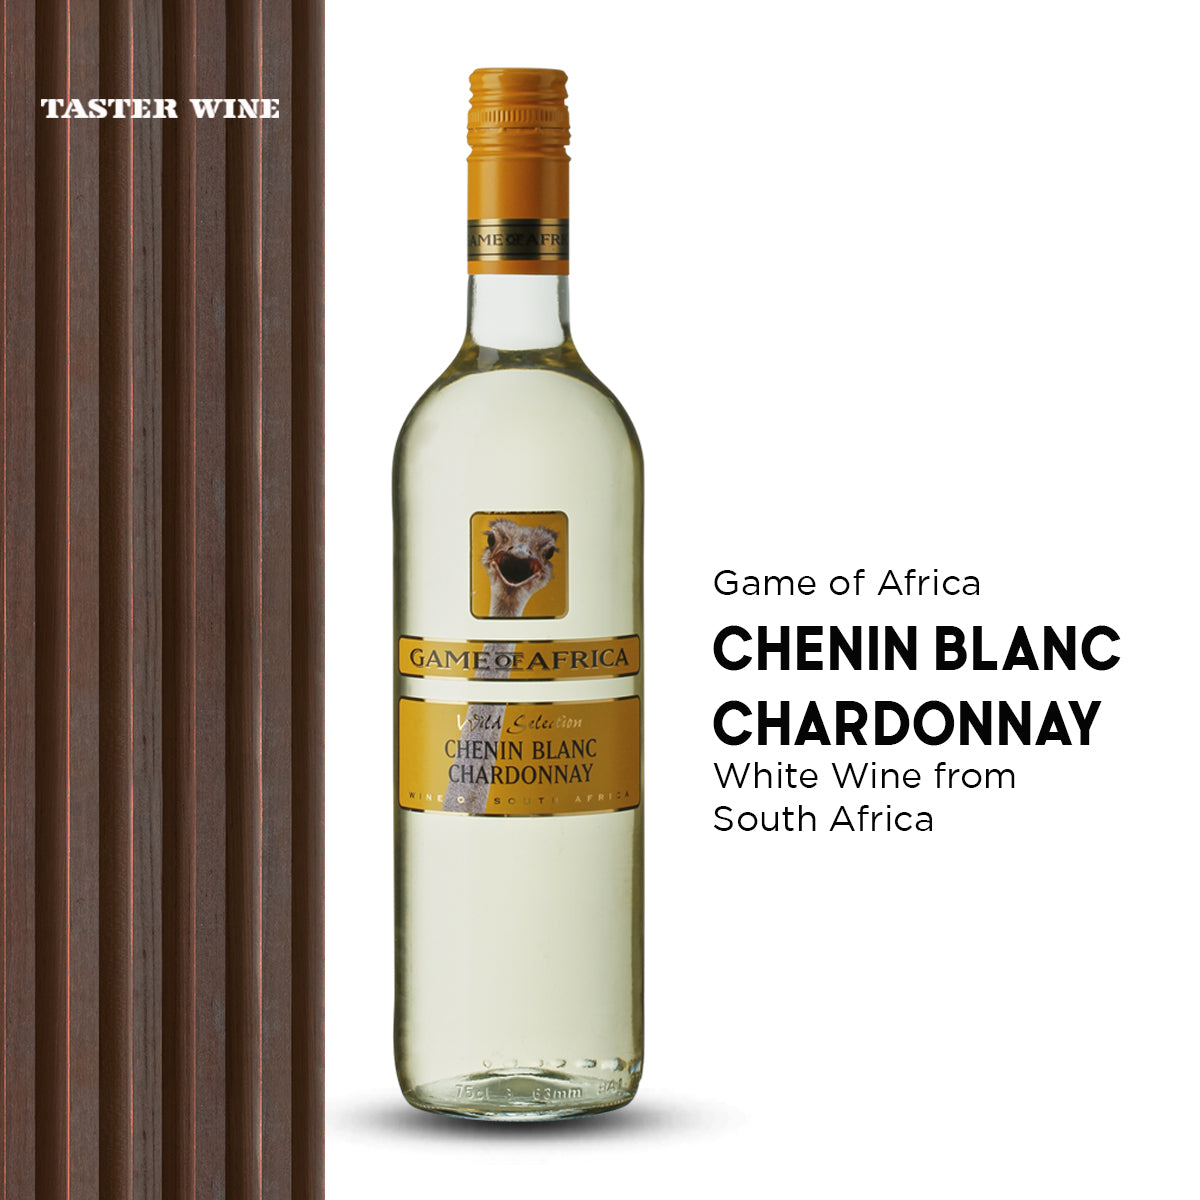 Game of Africa Chenin Blanc Chardonnay Western Cape - Bloom Concept